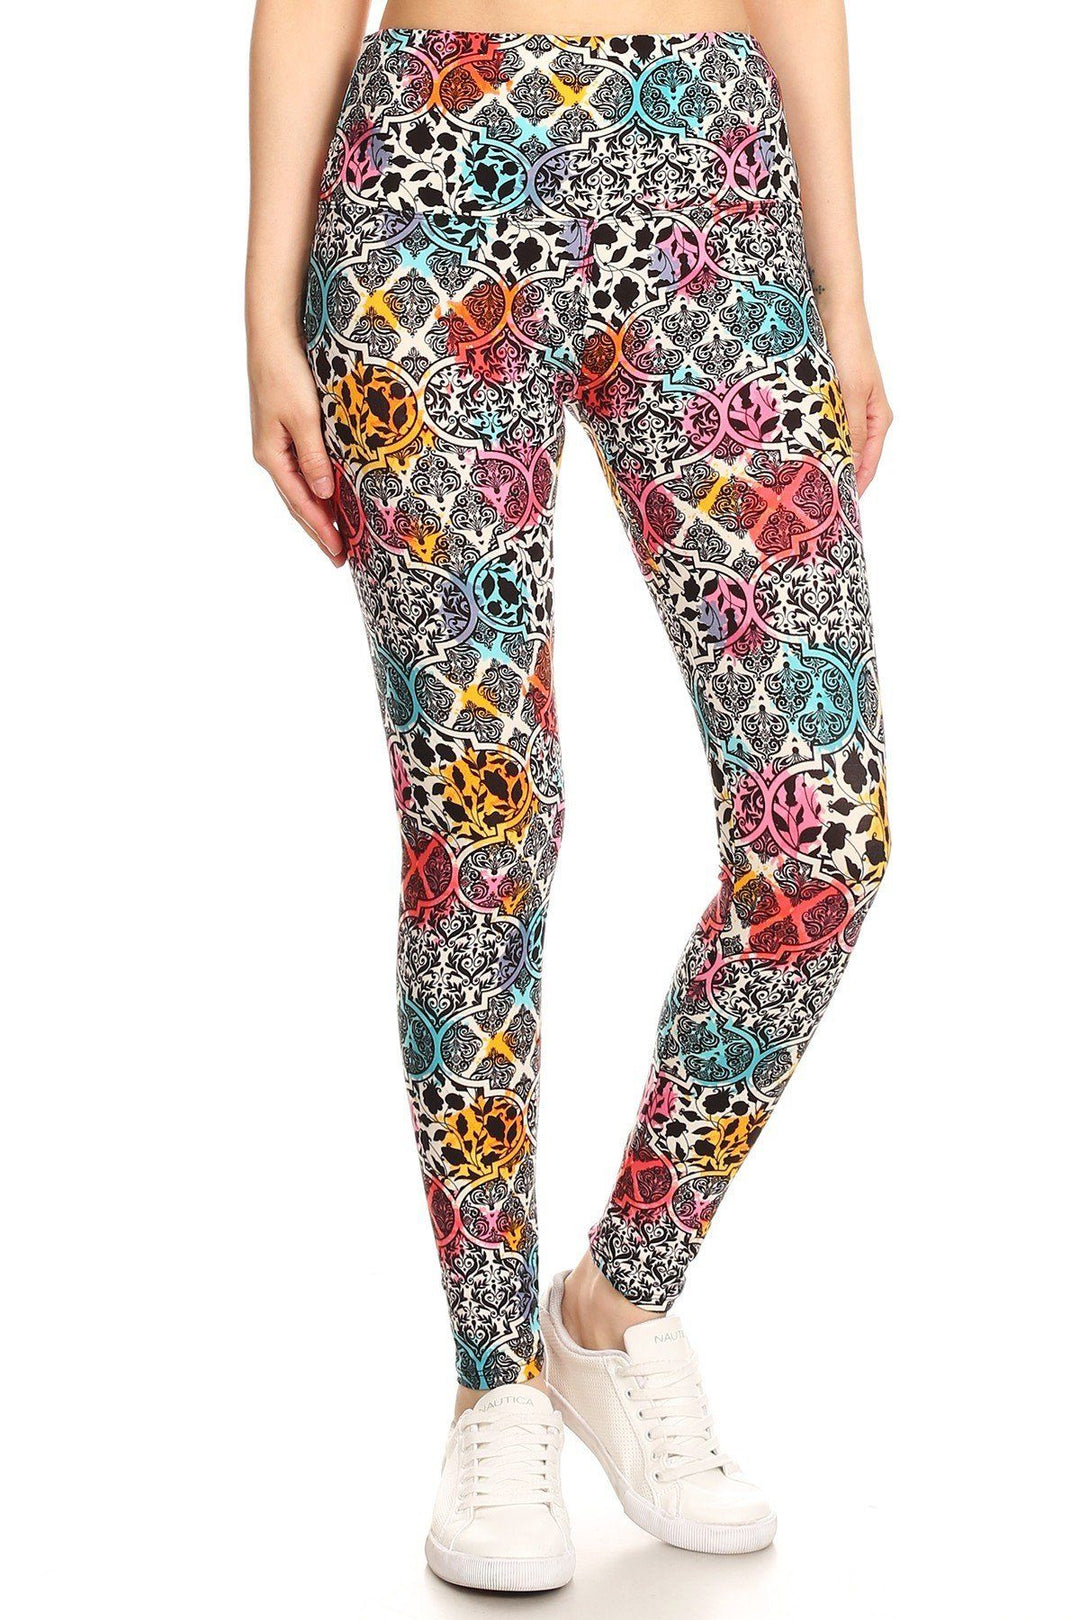 5-inch Long Yoga Style Banded Lined Damask Pattern Printed Knit Legging With High Waist